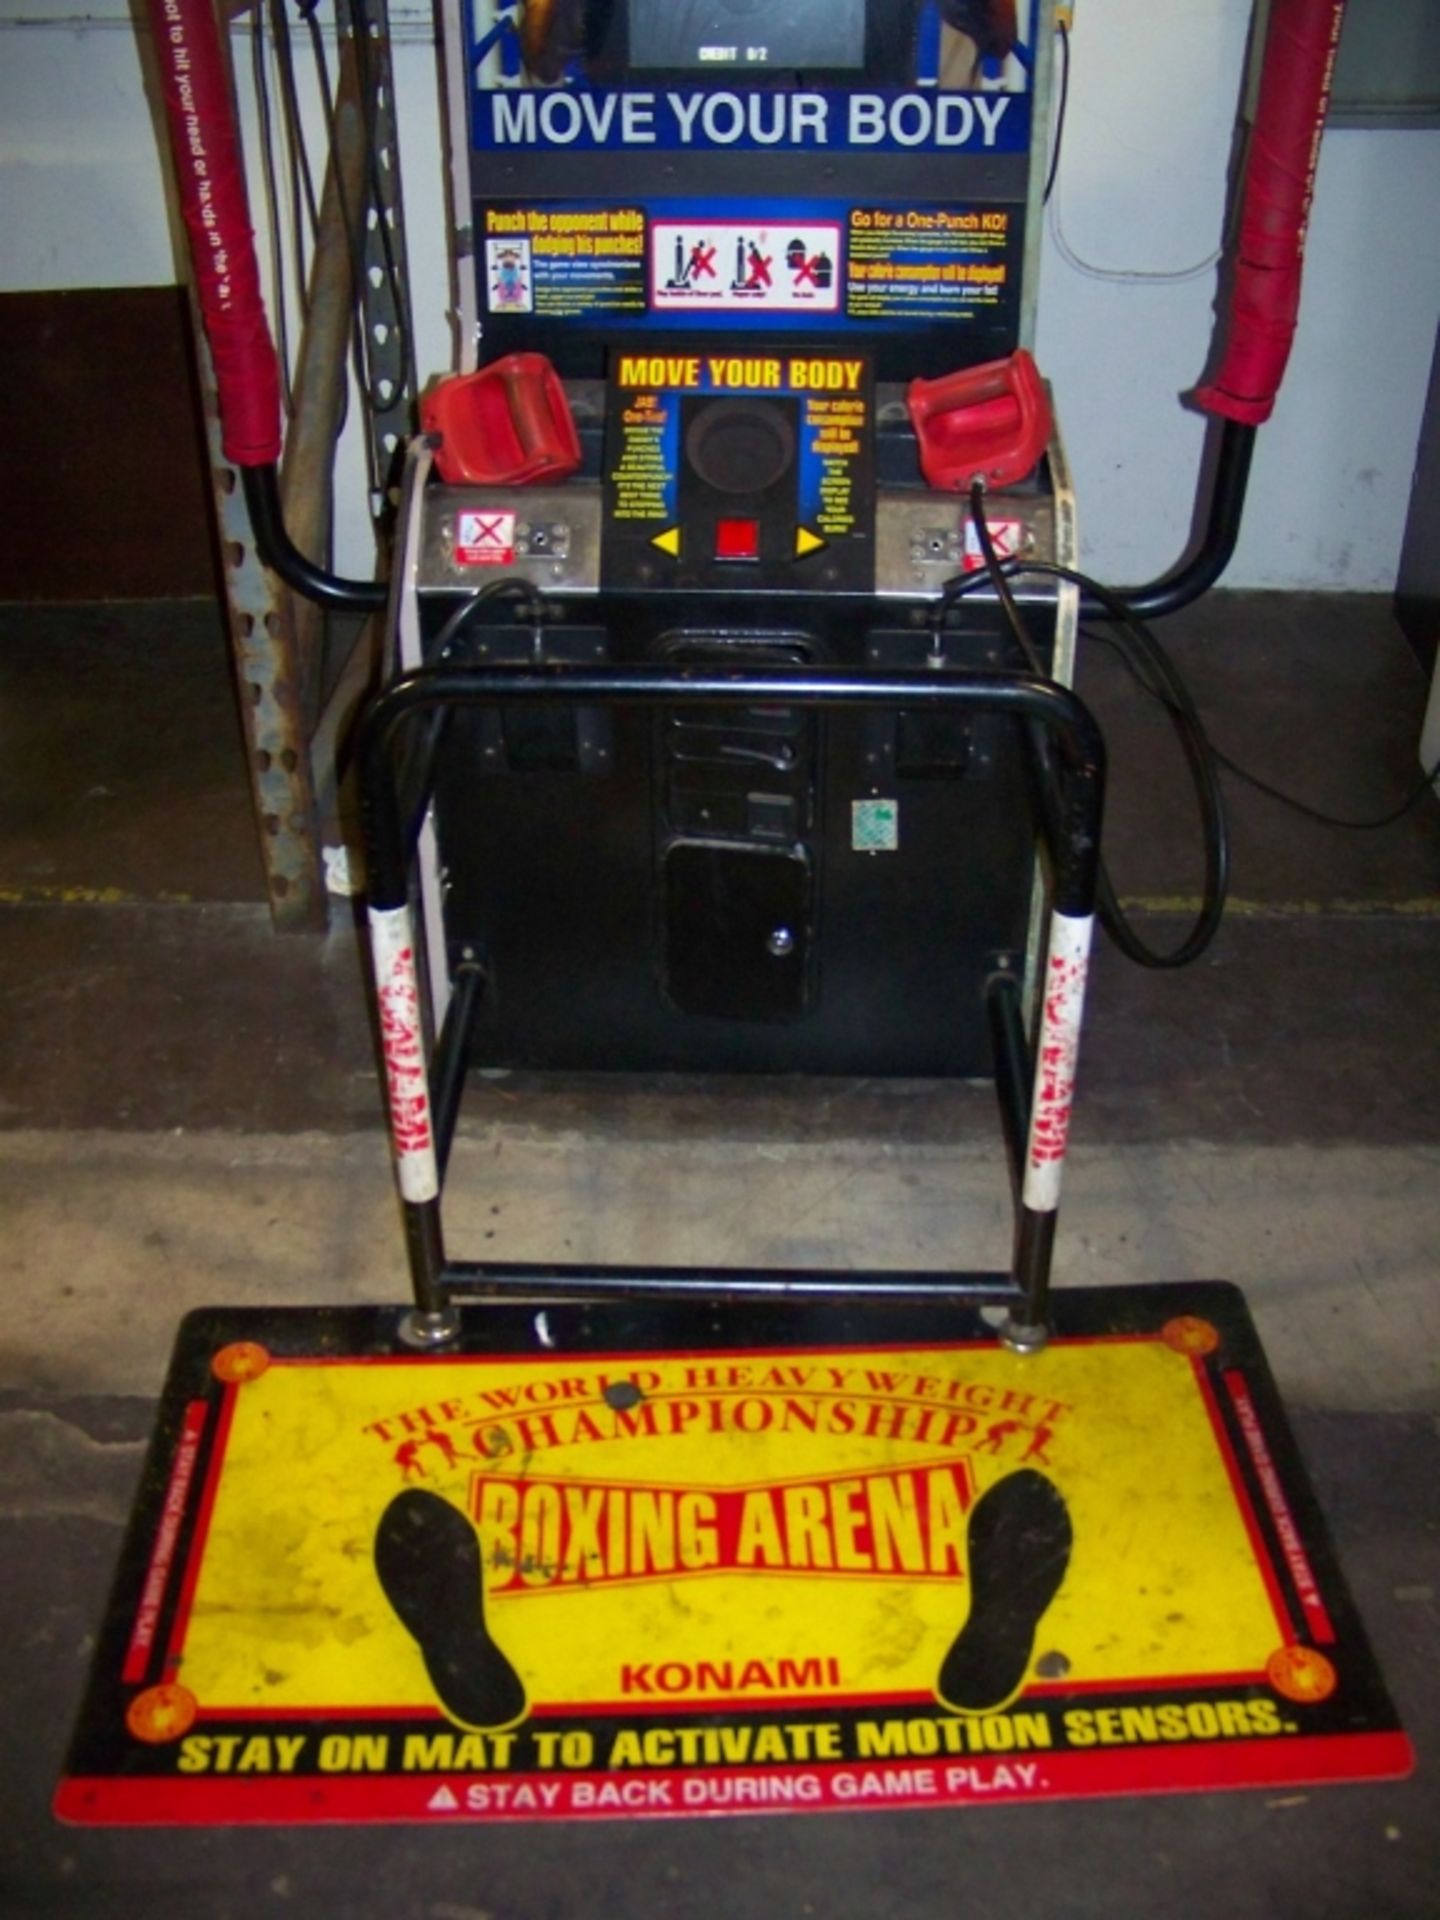 MOCAP BOXING SPORTS ARCADE GAME KONAMI Item is in used condition. Evidence of wear and commercial - Image 5 of 7